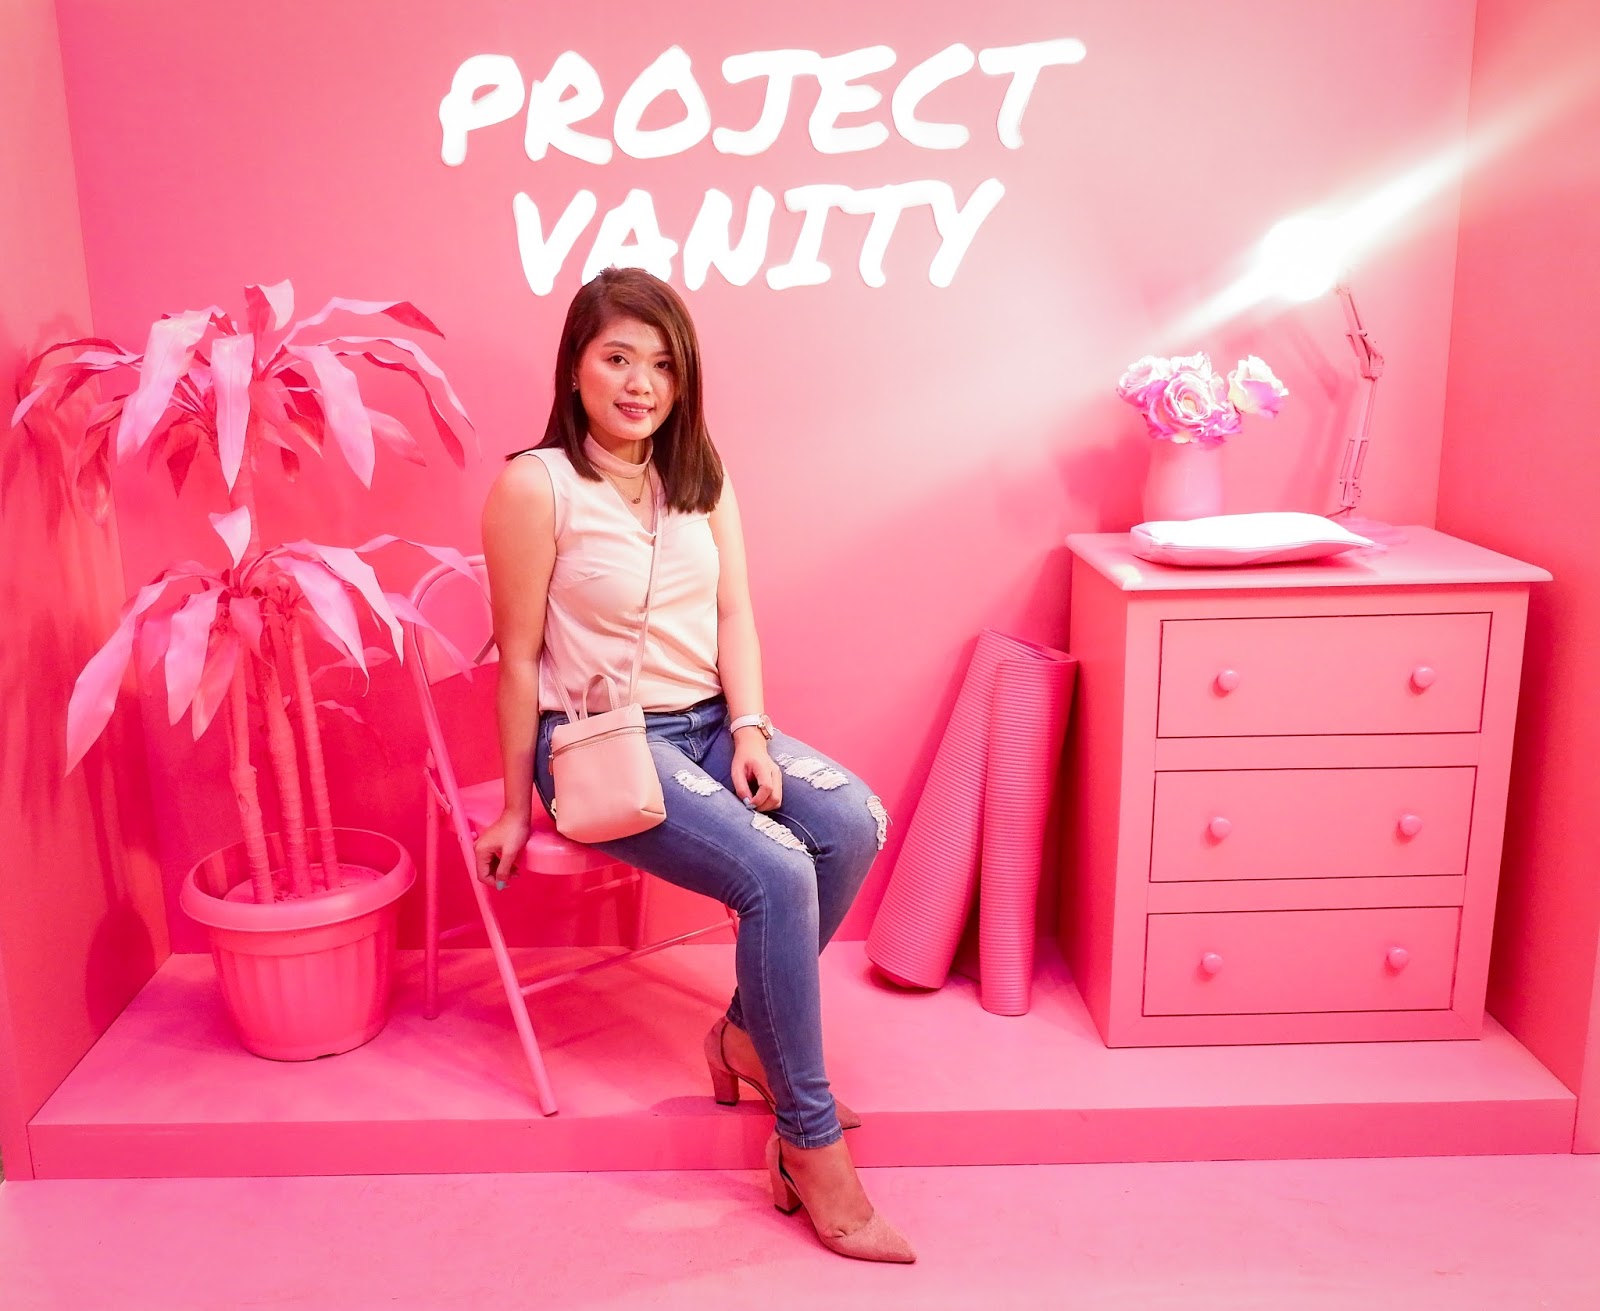 EVERYTHING IS PINK ON PROJECT VANITY "TENACIOUS" 10th ANNIVERSARY